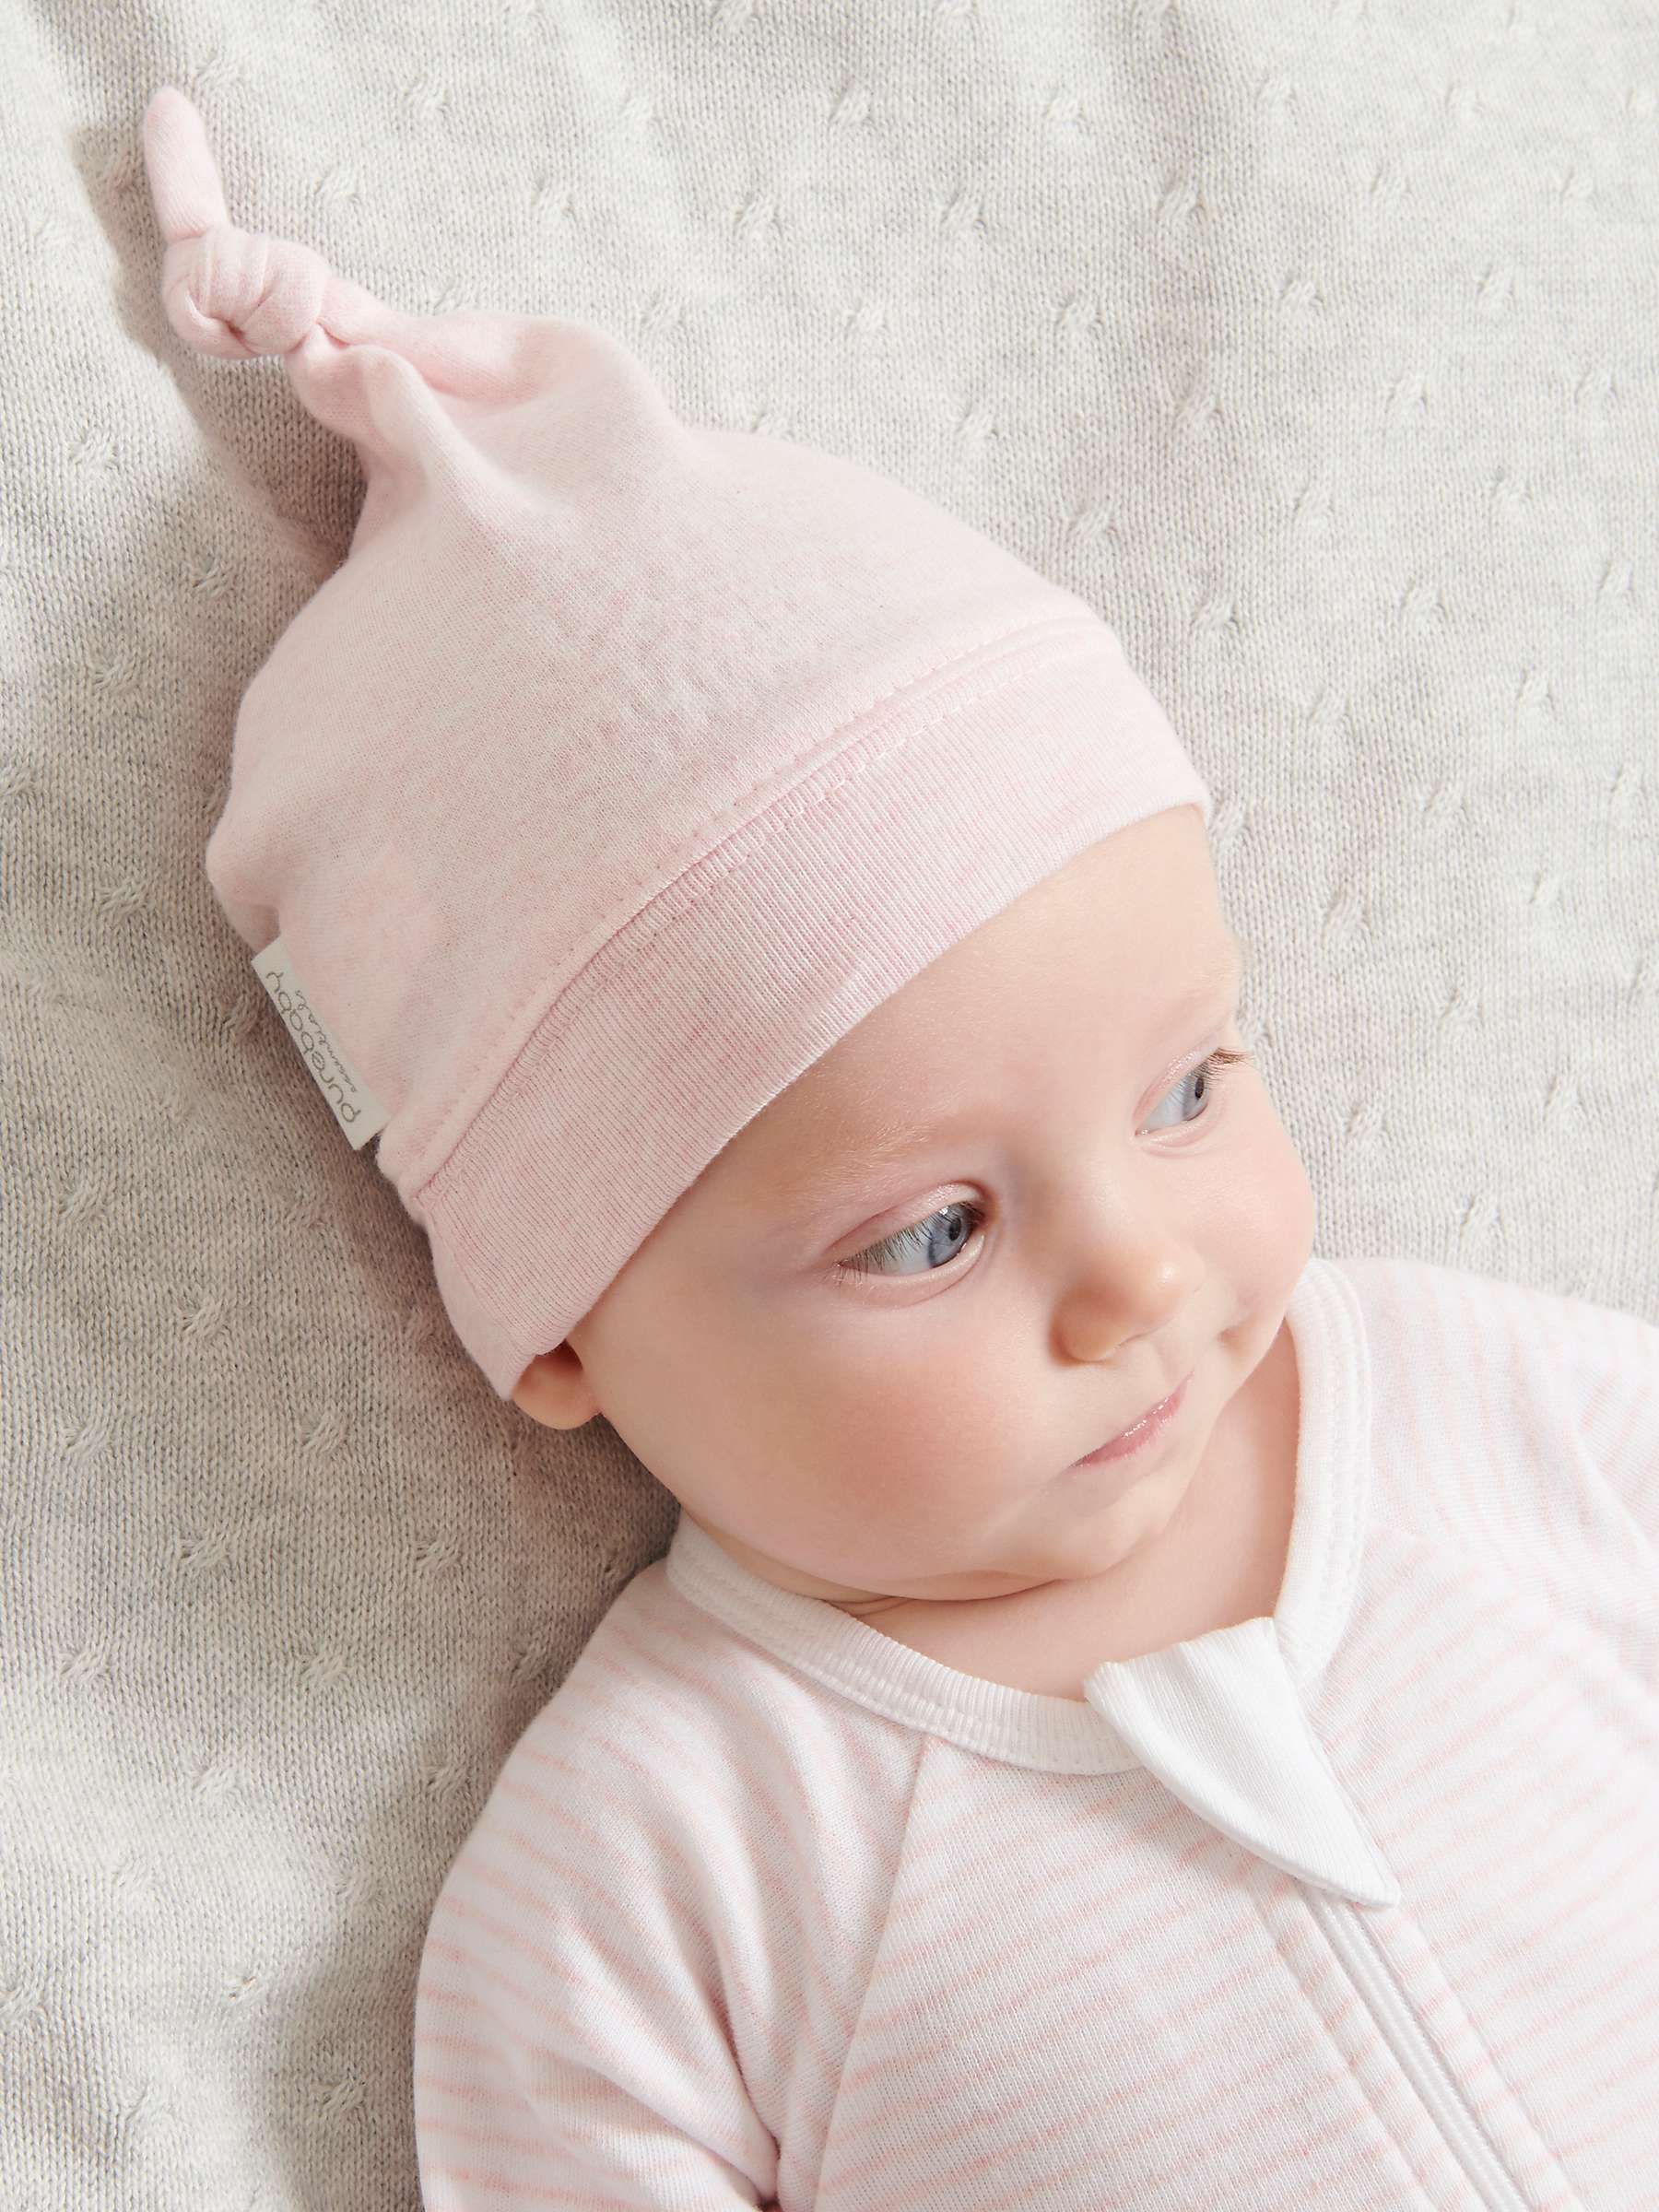 Buy Purebaby Knot Hat Online at johnlewis.com